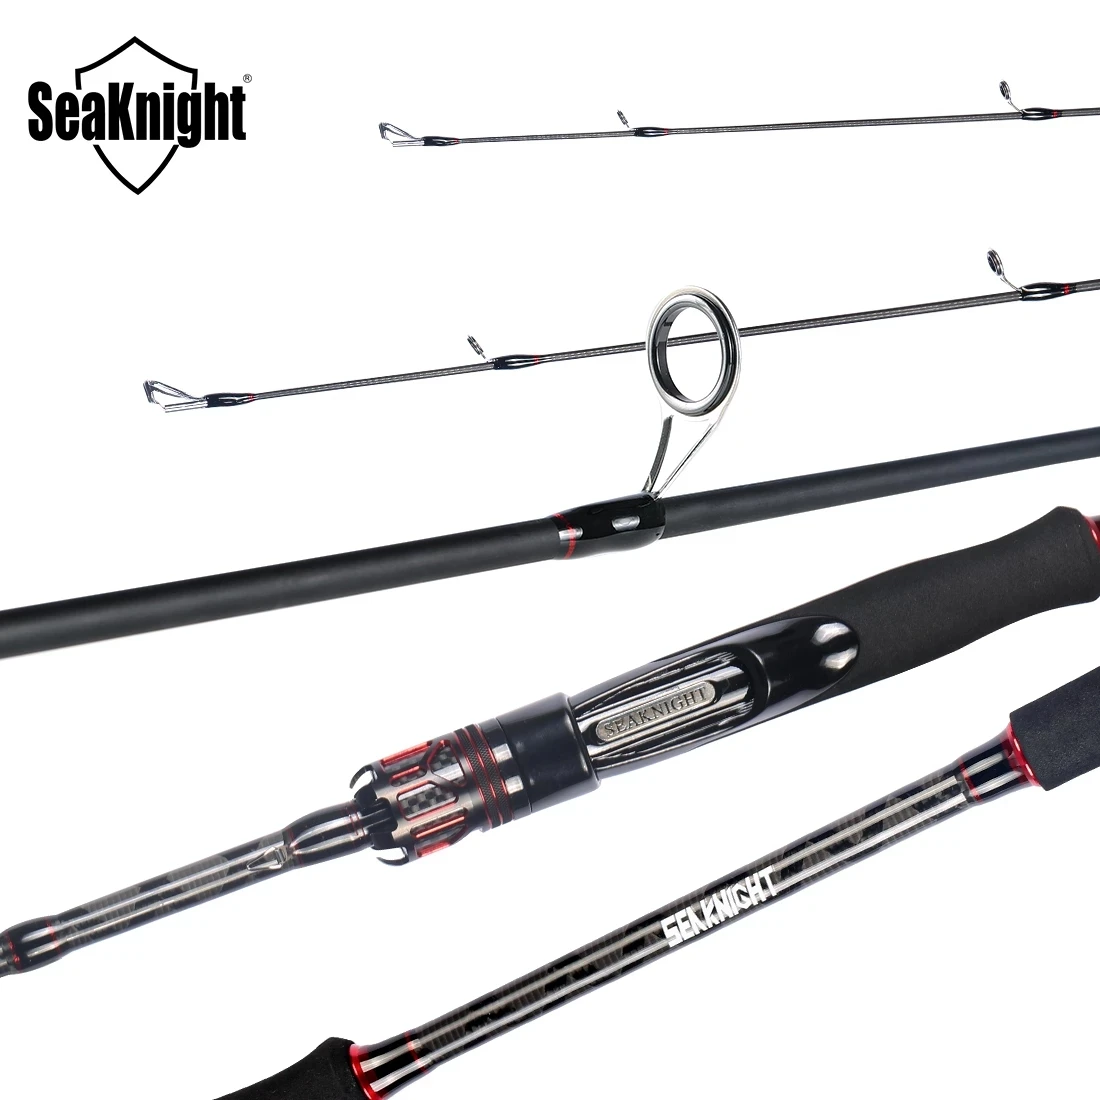 Warg Series Seaknight Brand Carbon Fishing Rod Ceramic K-Guide 1.8M 1.98M 2.1M 2.4M Spinning Casting 2 Sections Lure Rod